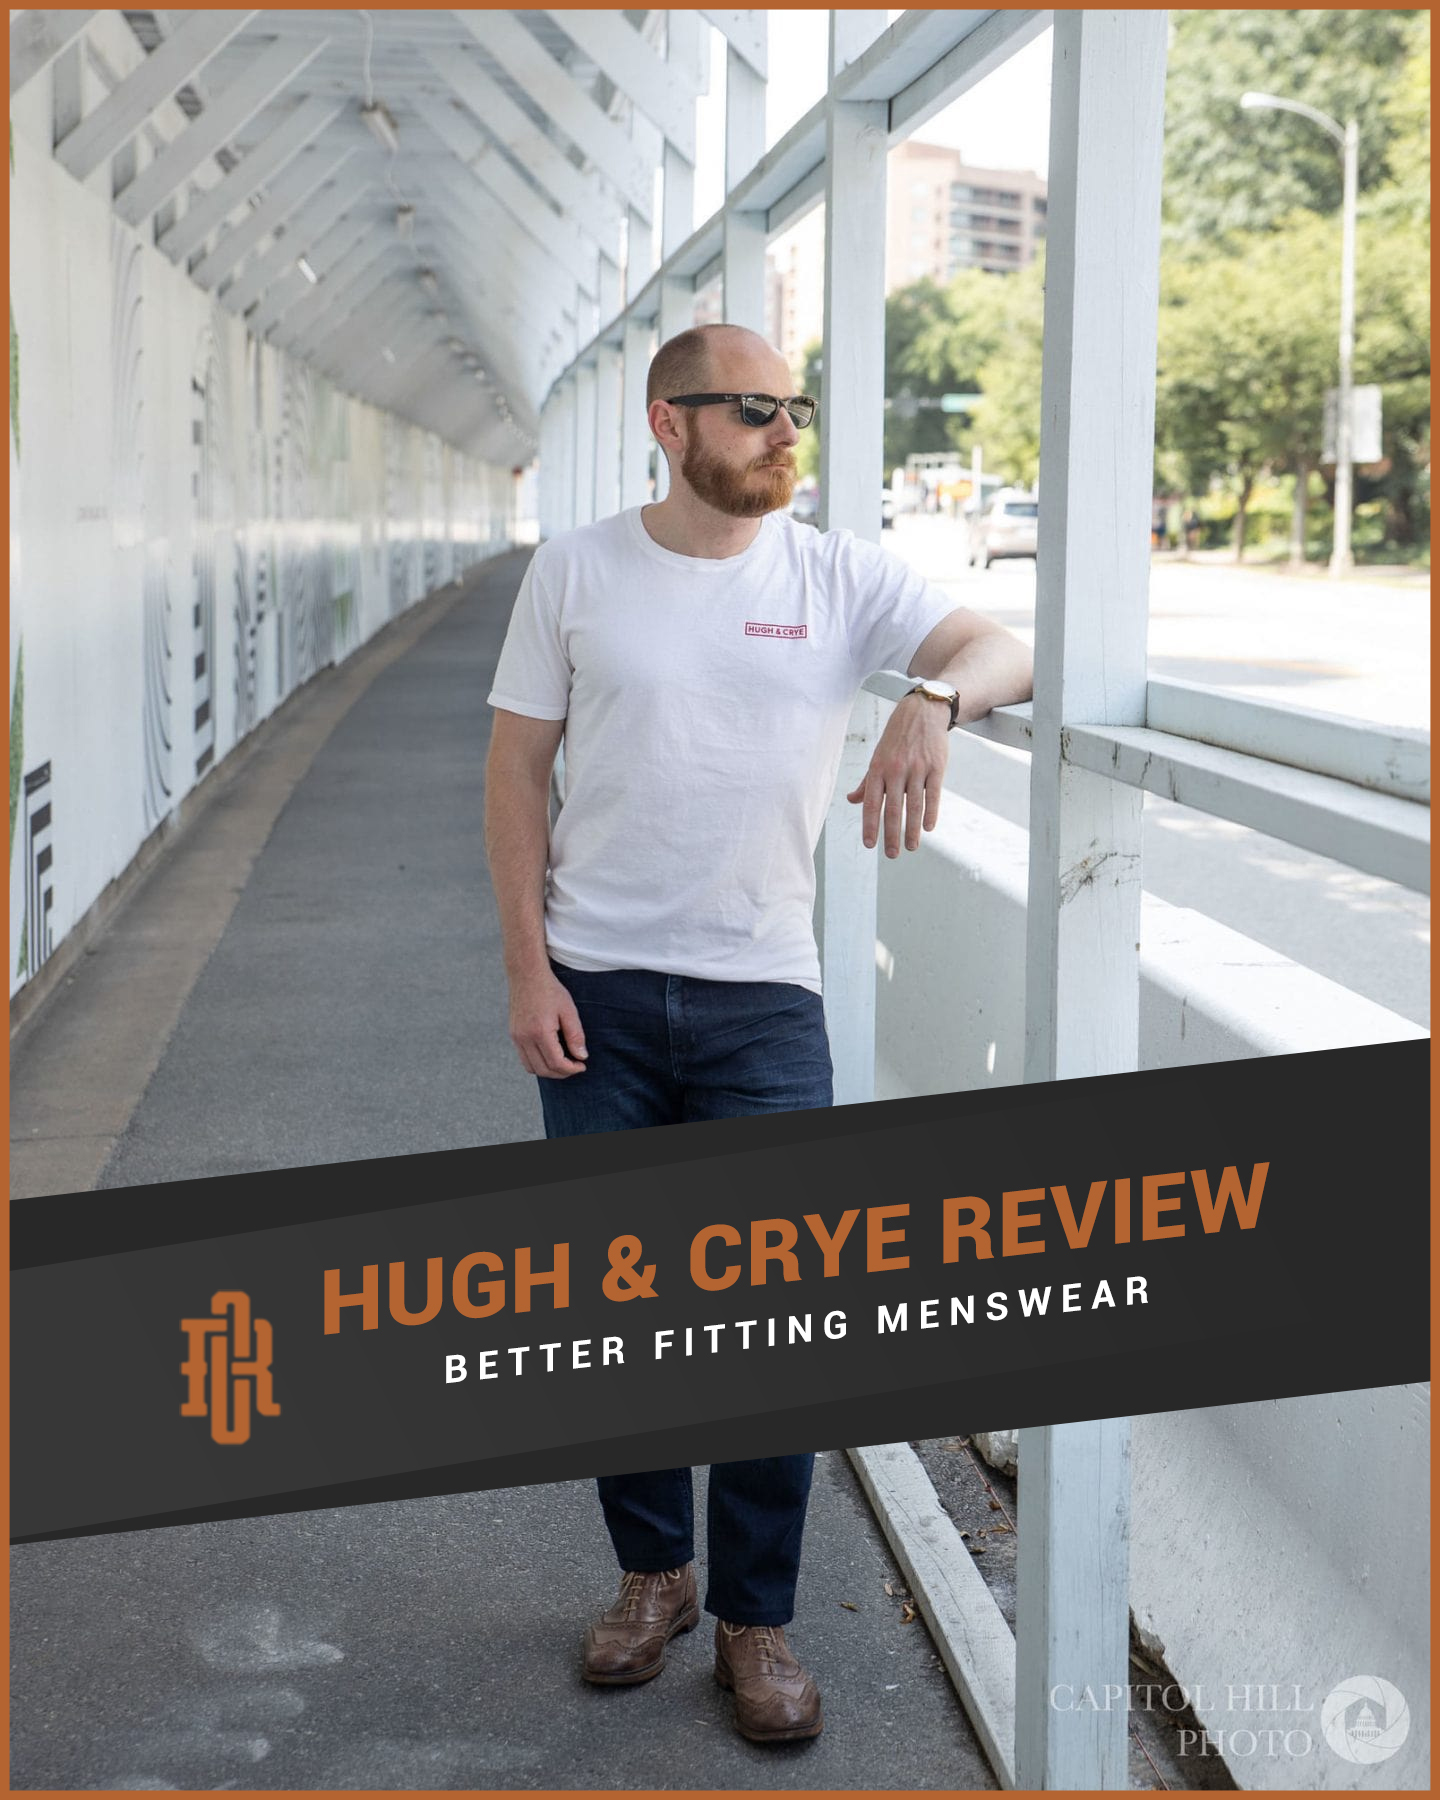 Hugh & Crye Review: Better Fitting Menswear